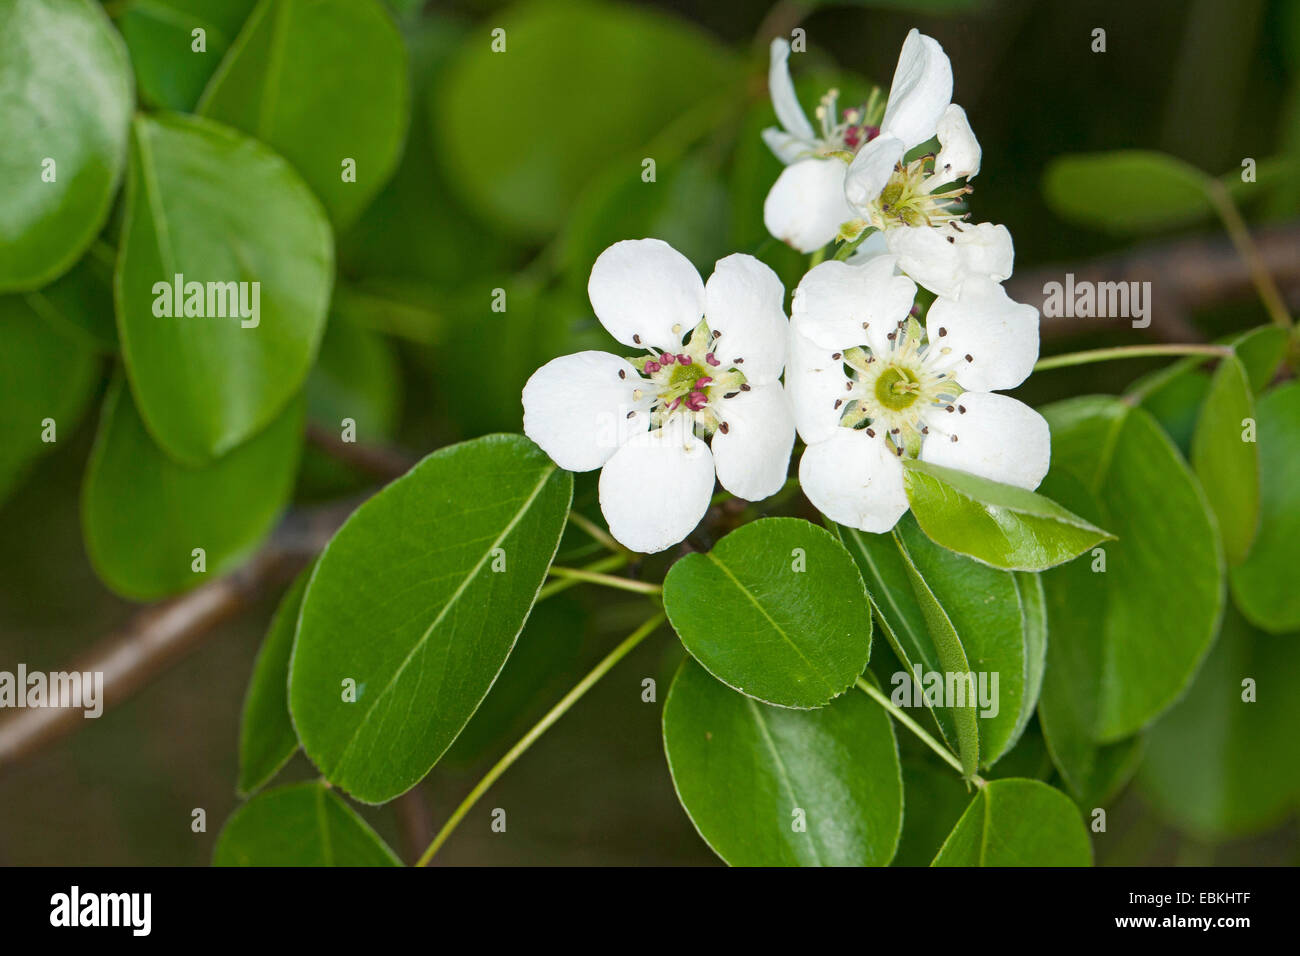 European Wild Pear (Pyrus pyraster), blooming branch, Germany Stock Photo